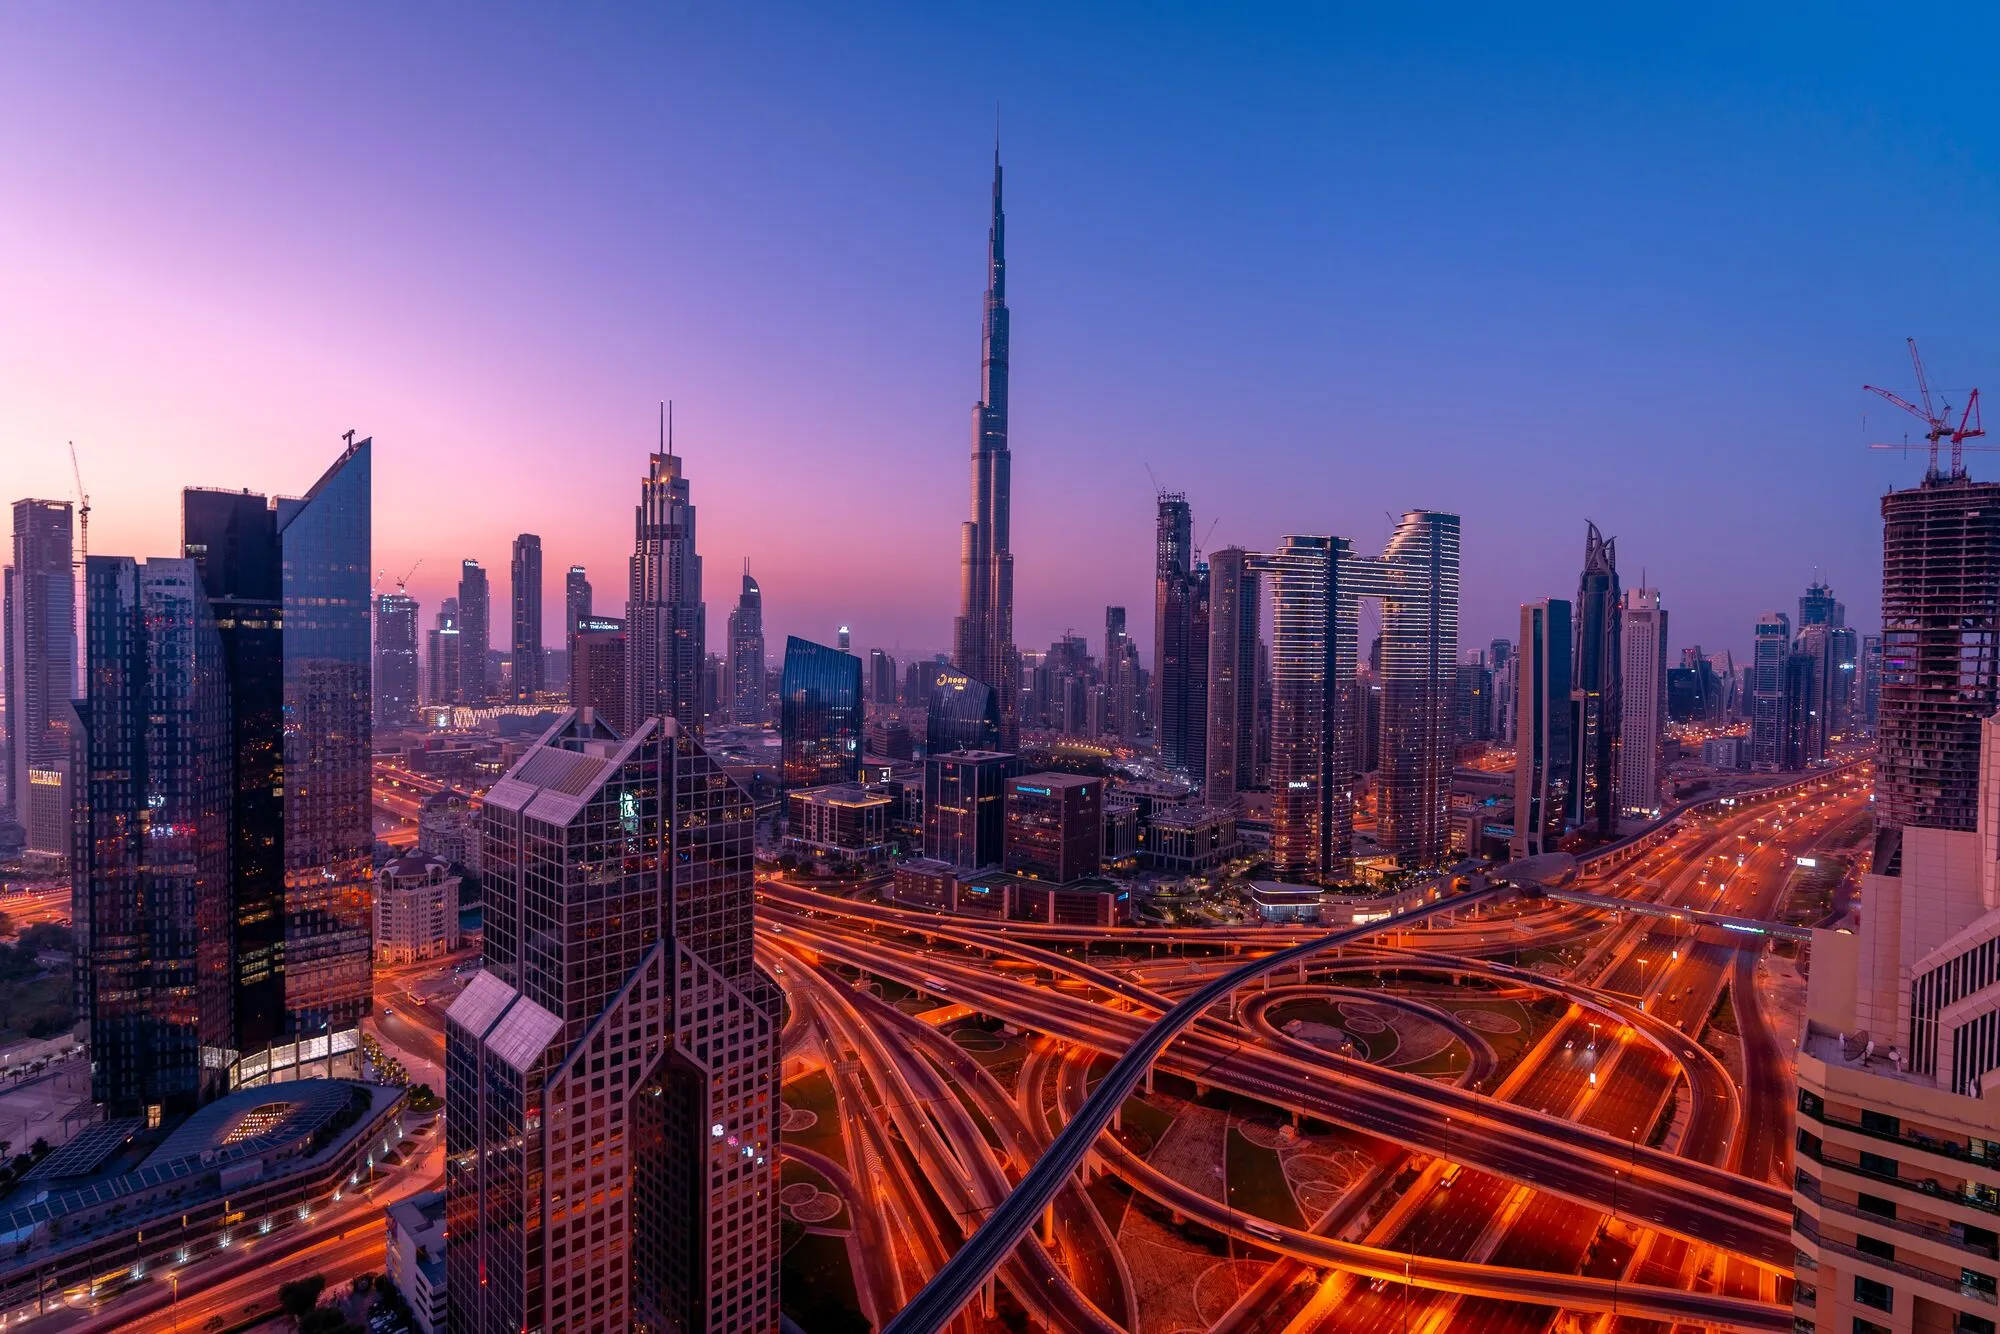 15 Wonderful Things to Do in Dubai for First-Timers - A Complete Guide to Backpacking Dubai